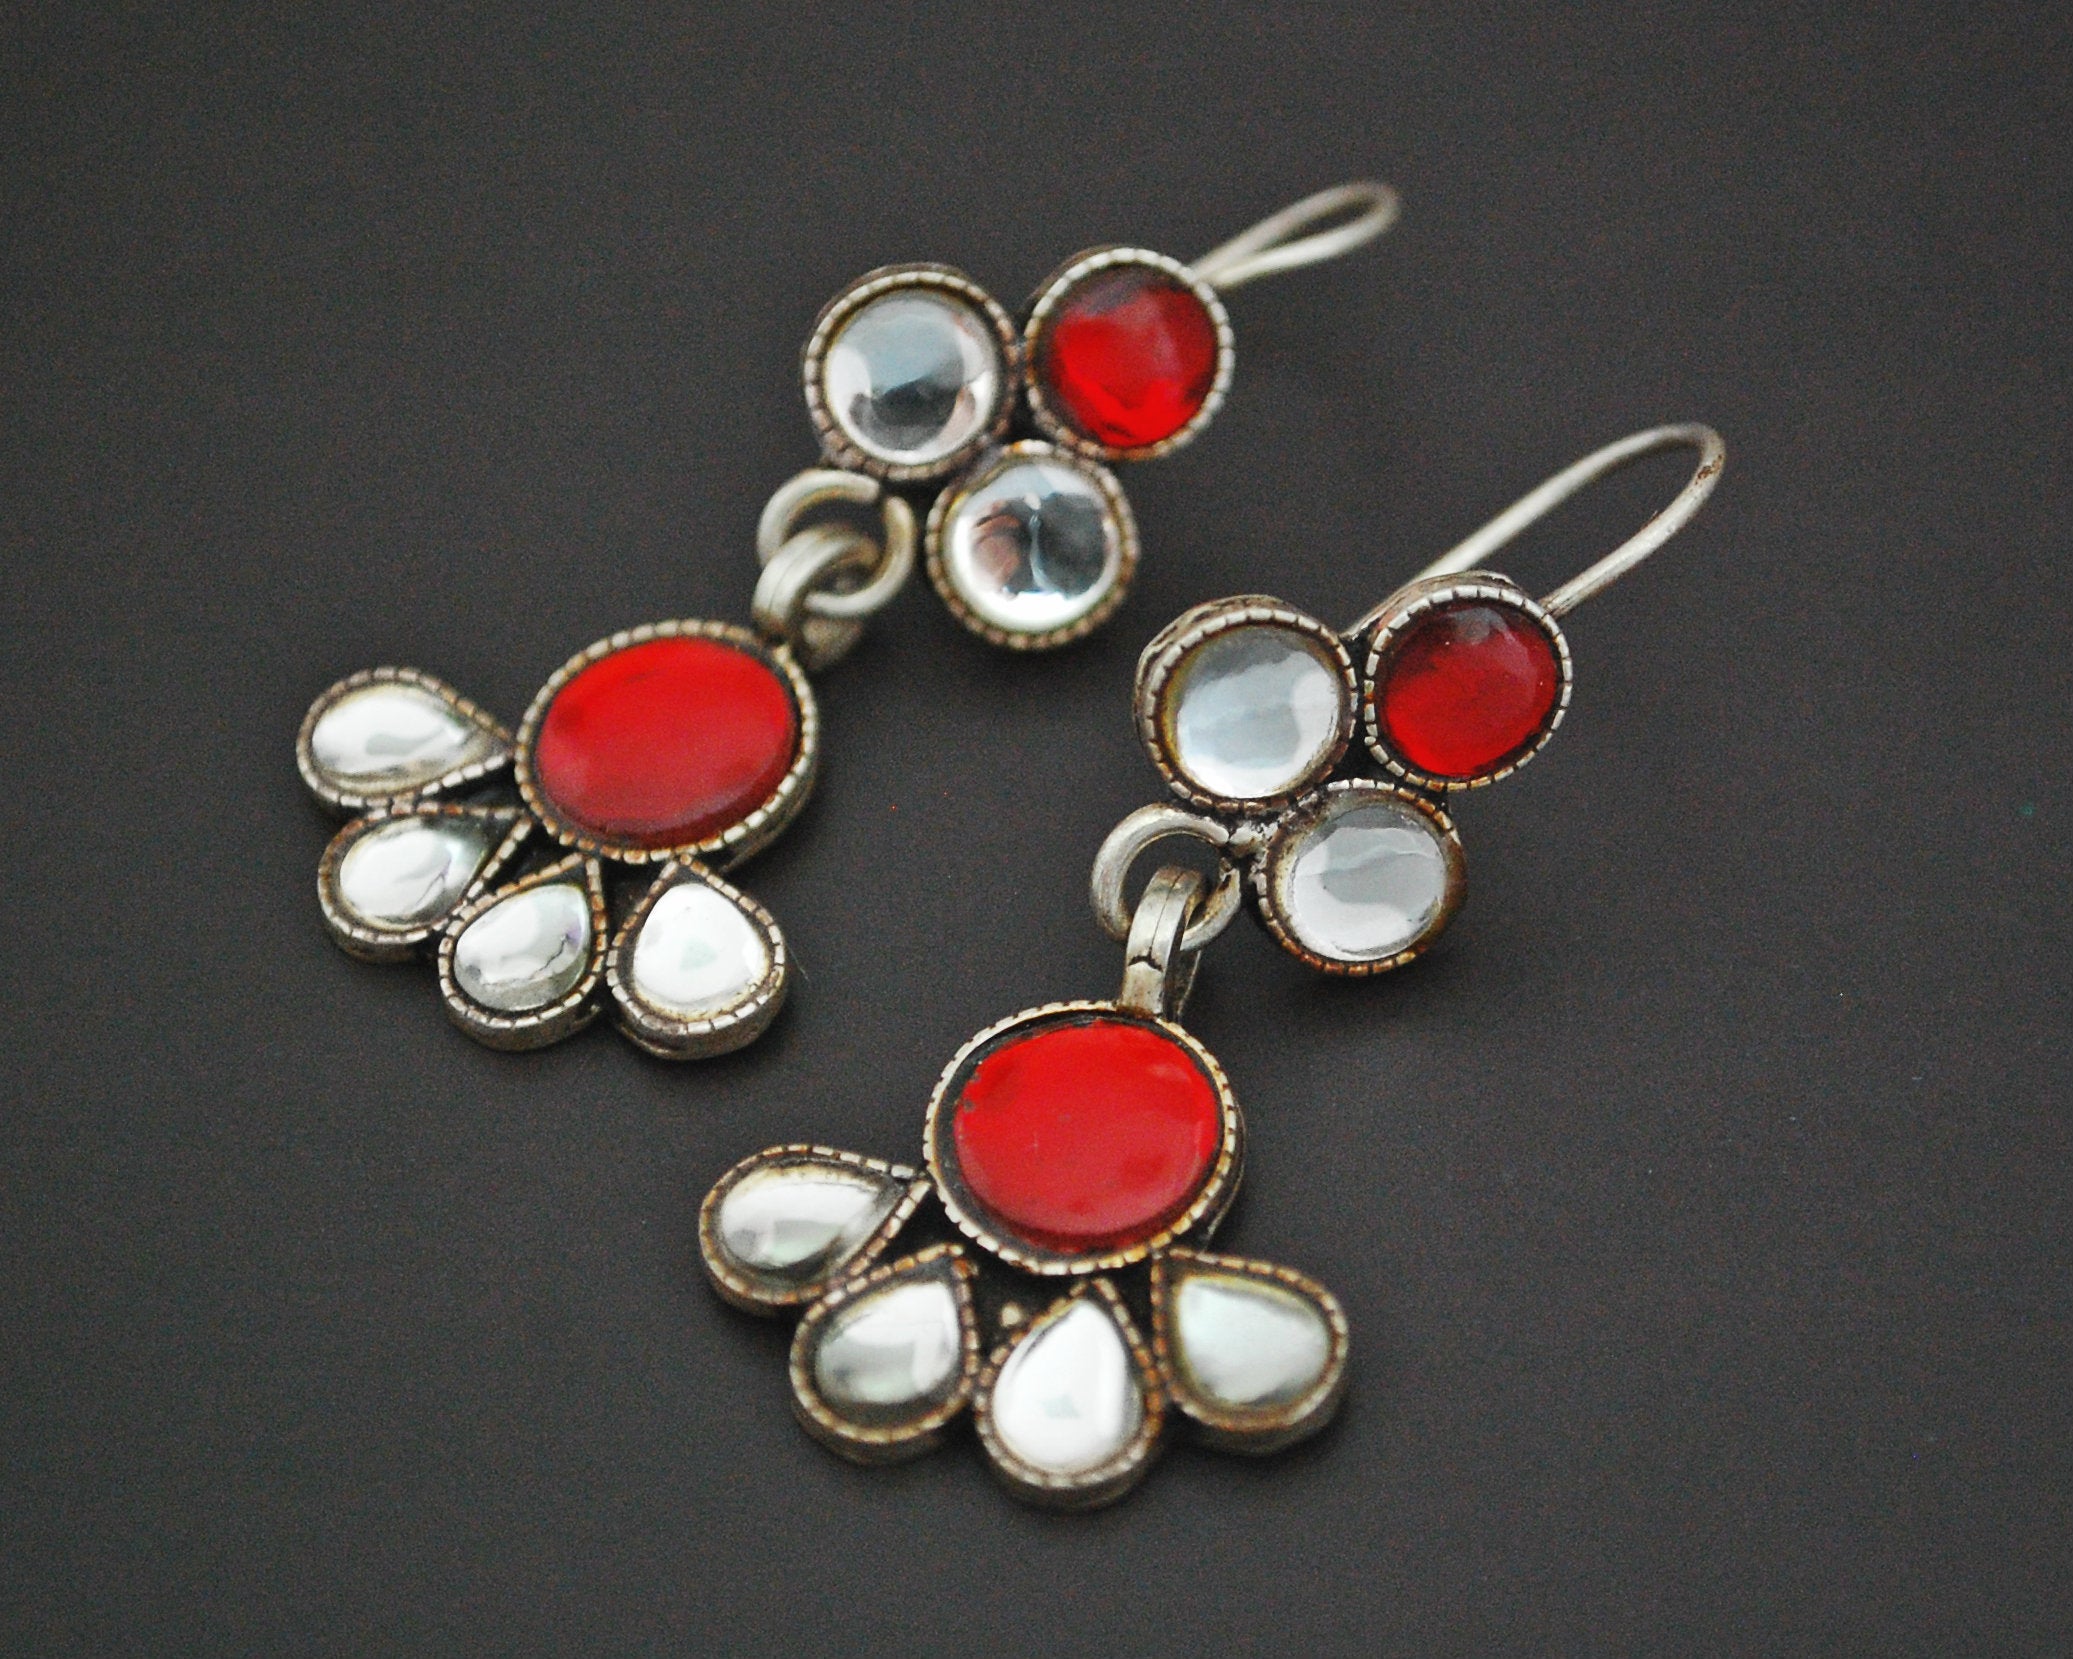 Rajasthani Glass Earrings - Red and White